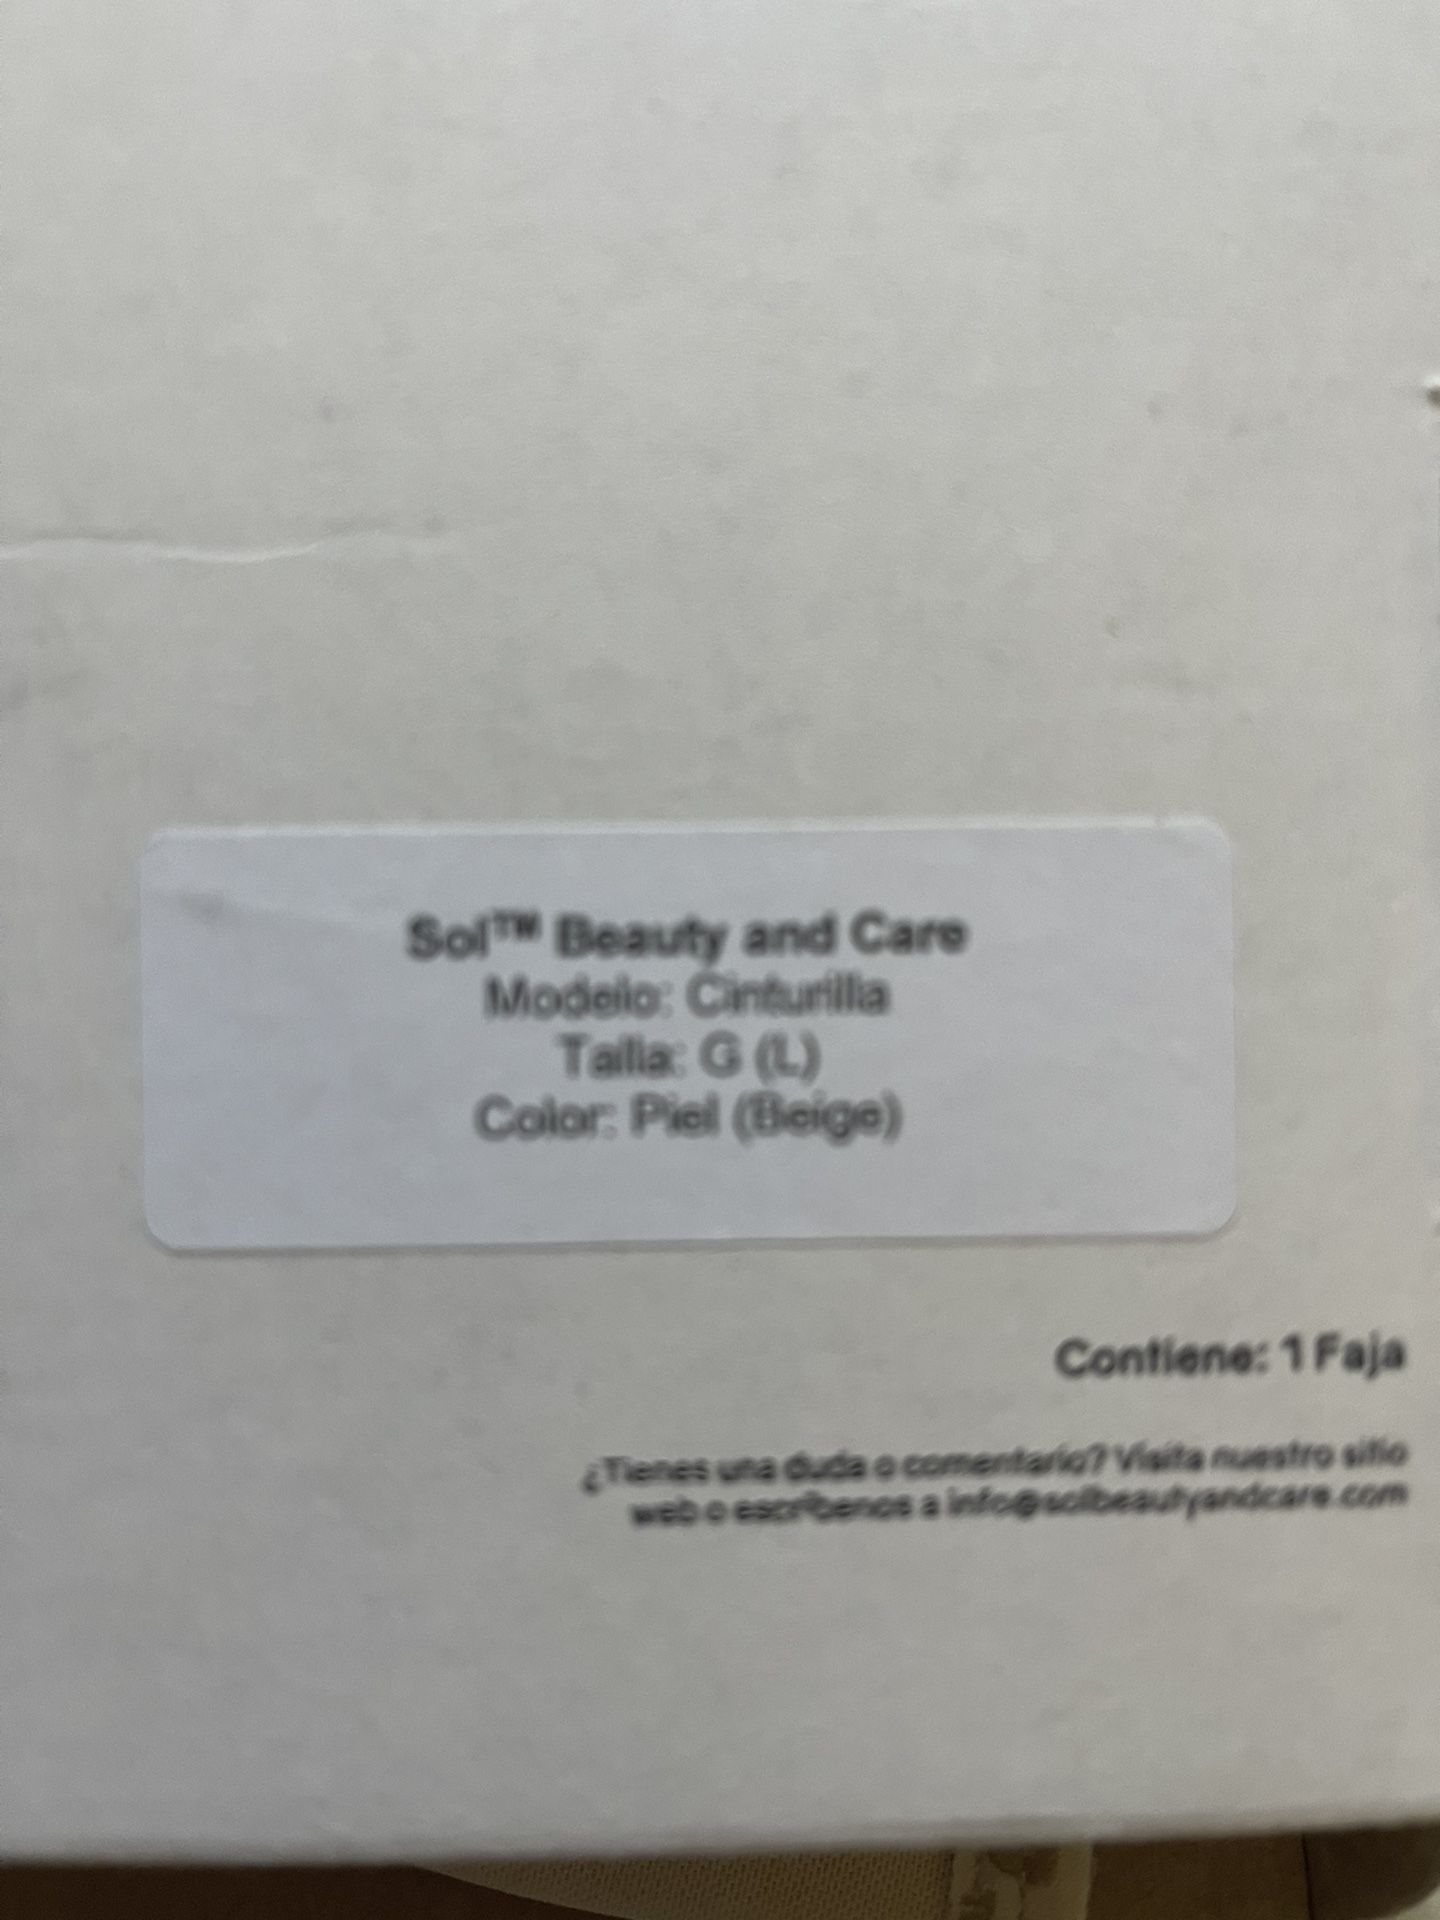 Sol Beauty And Care Cinturilla for Sale in Fresno, CA - OfferUp